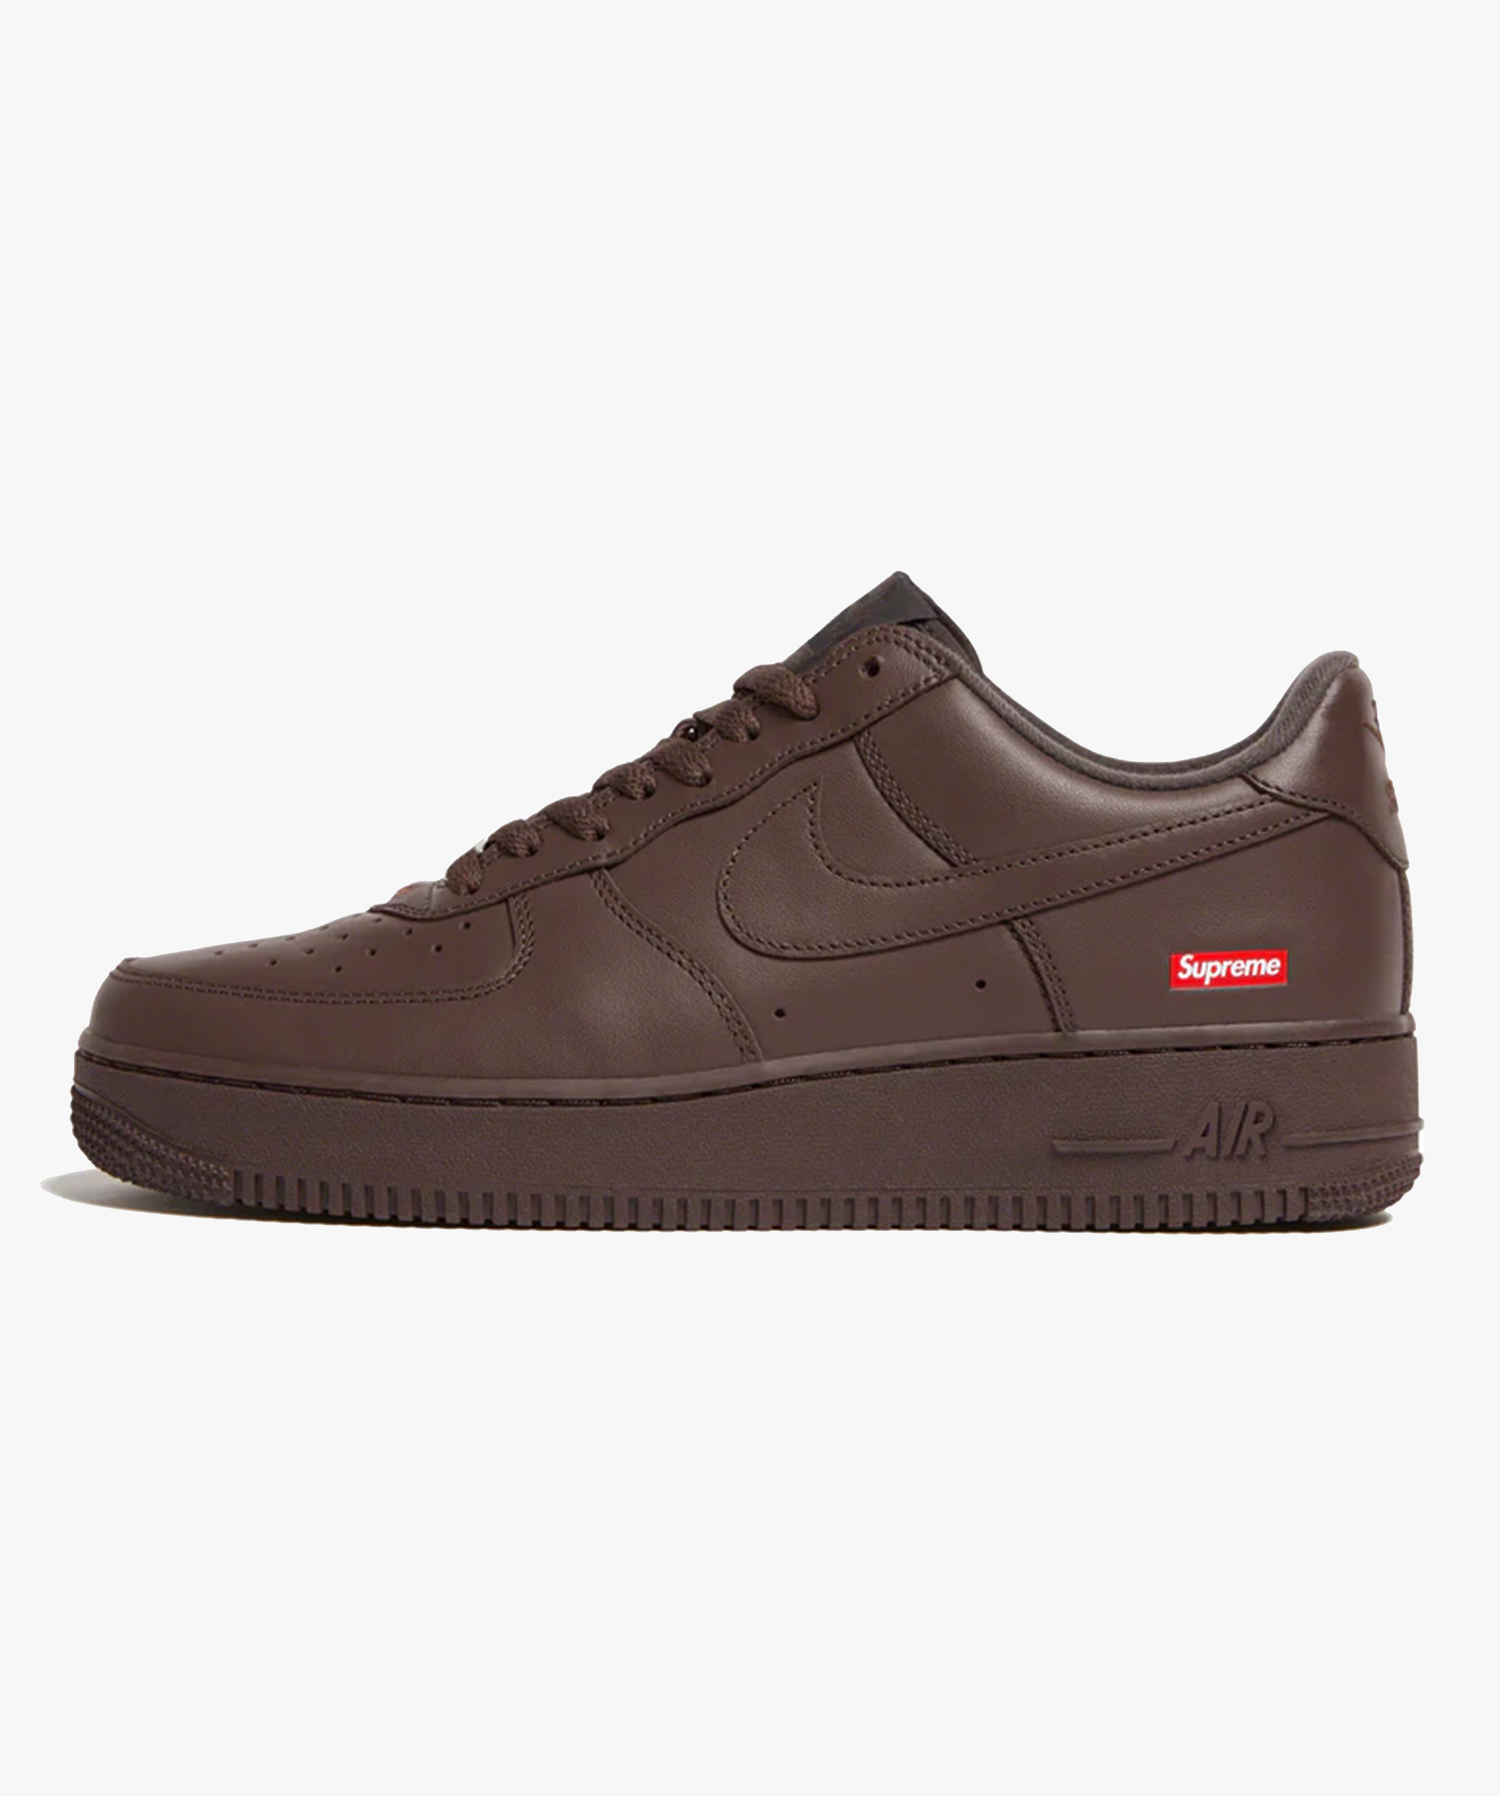 Nike/ Supreme Air Force 1 'Baroque Brown' - Funky Insole